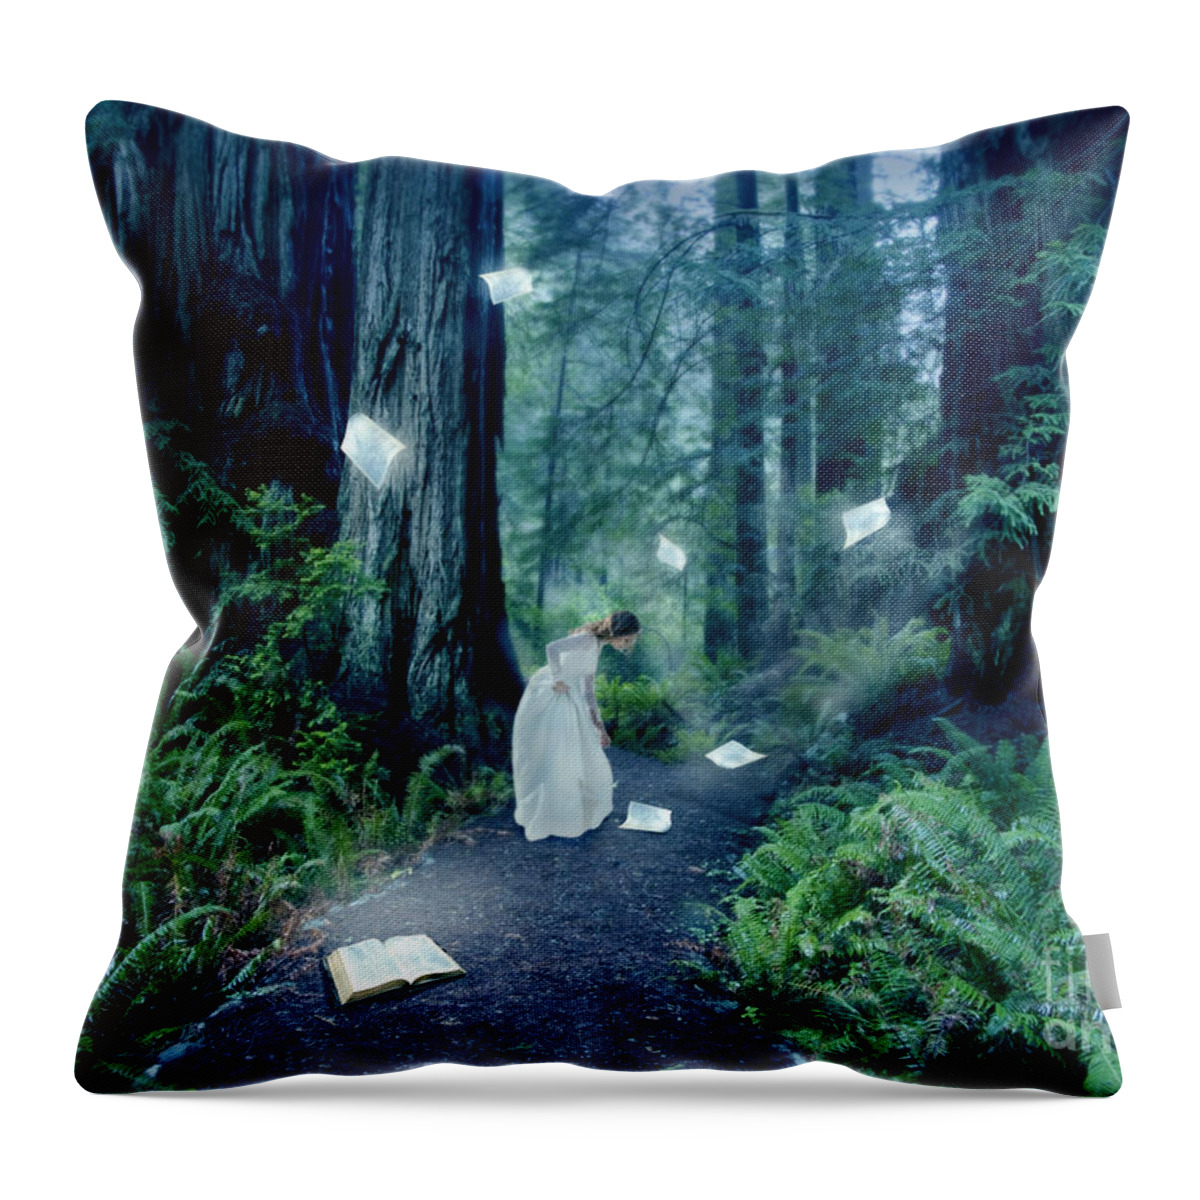  Book Throw Pillow featuring the photograph The Book to Light Her Path by Jill Battaglia